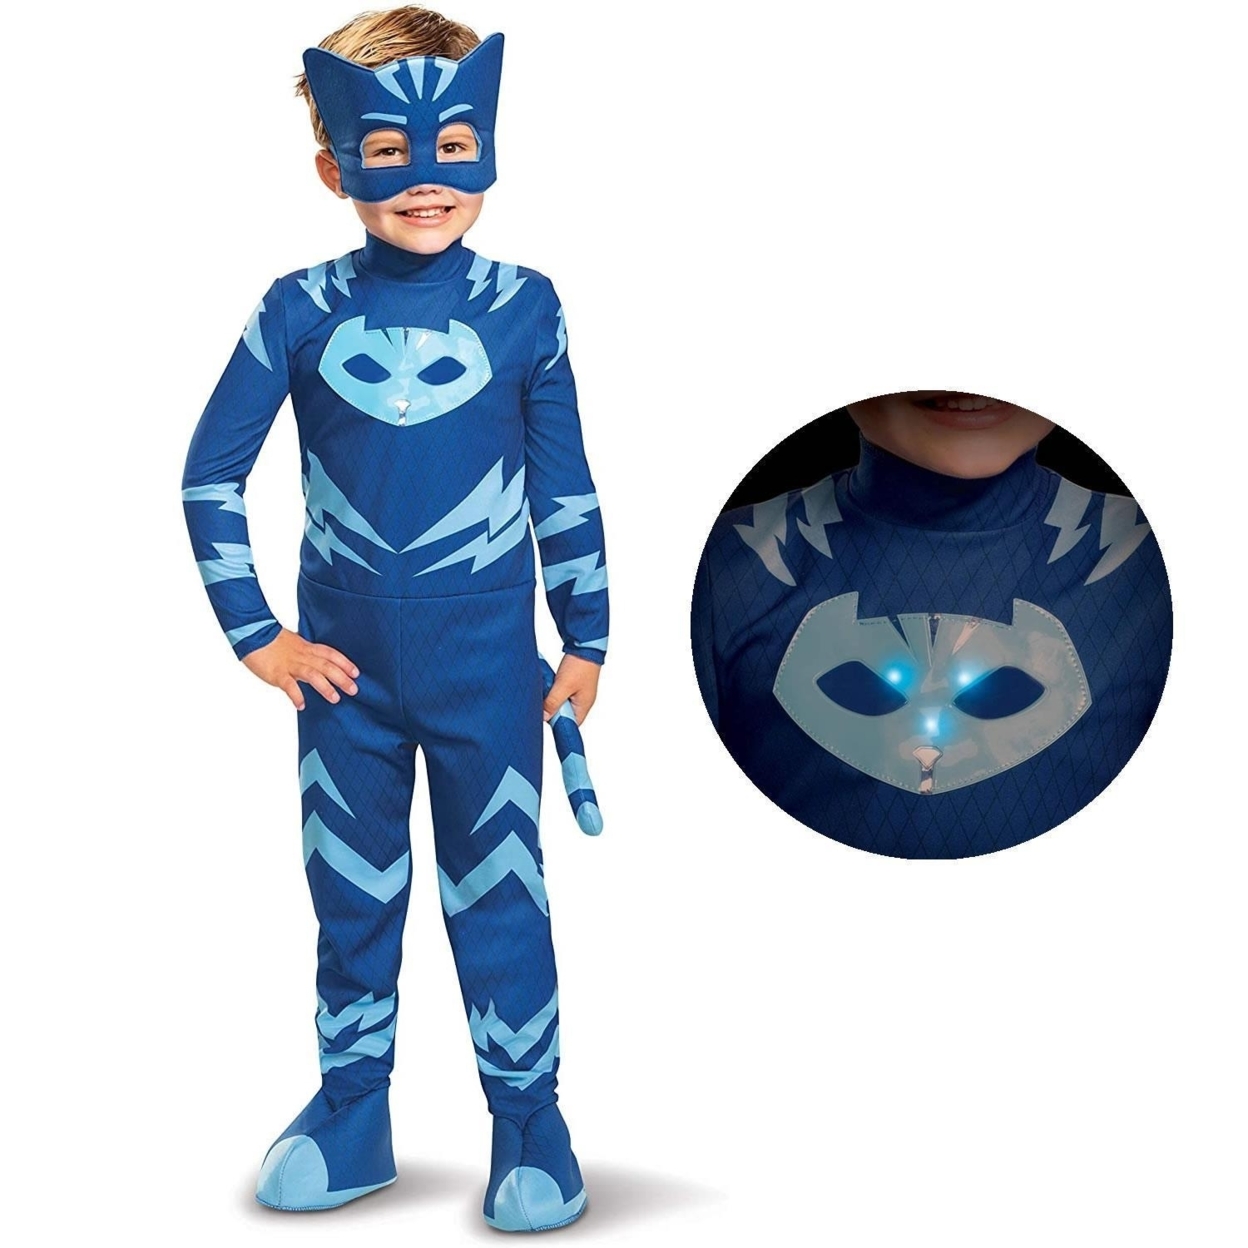 PJ Masks Catboy Deluxe Light-Up Toddler Size 2T Boys Costume Disguise